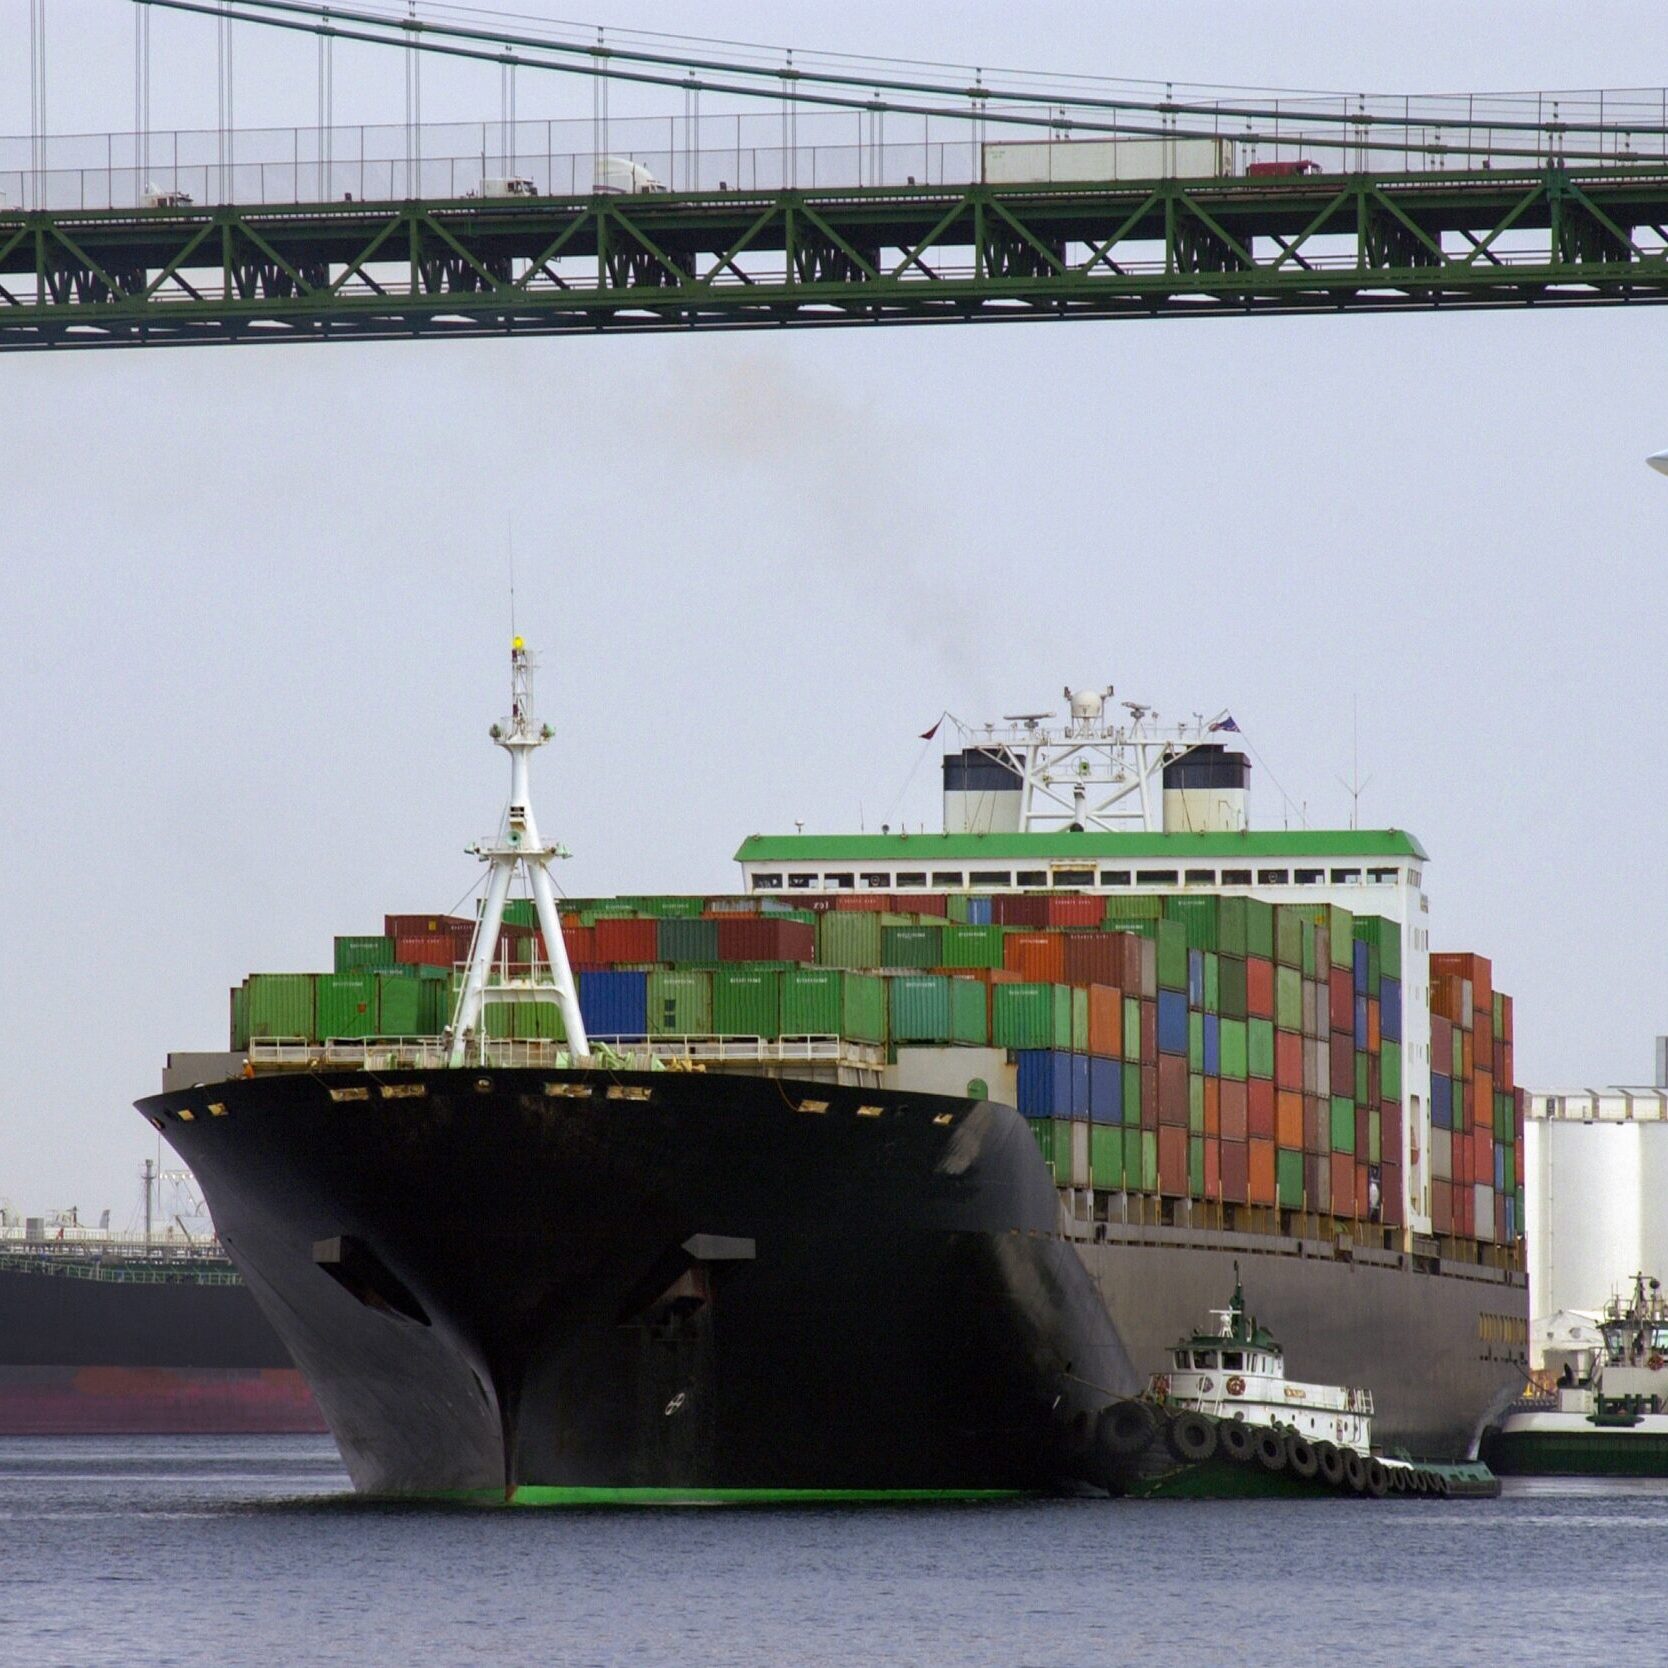 Transport - a large container ship pass under a road bridge with trucks on it with an aircraft coming in to land at a nearby airport.
Port of Long Beach, California, USA.